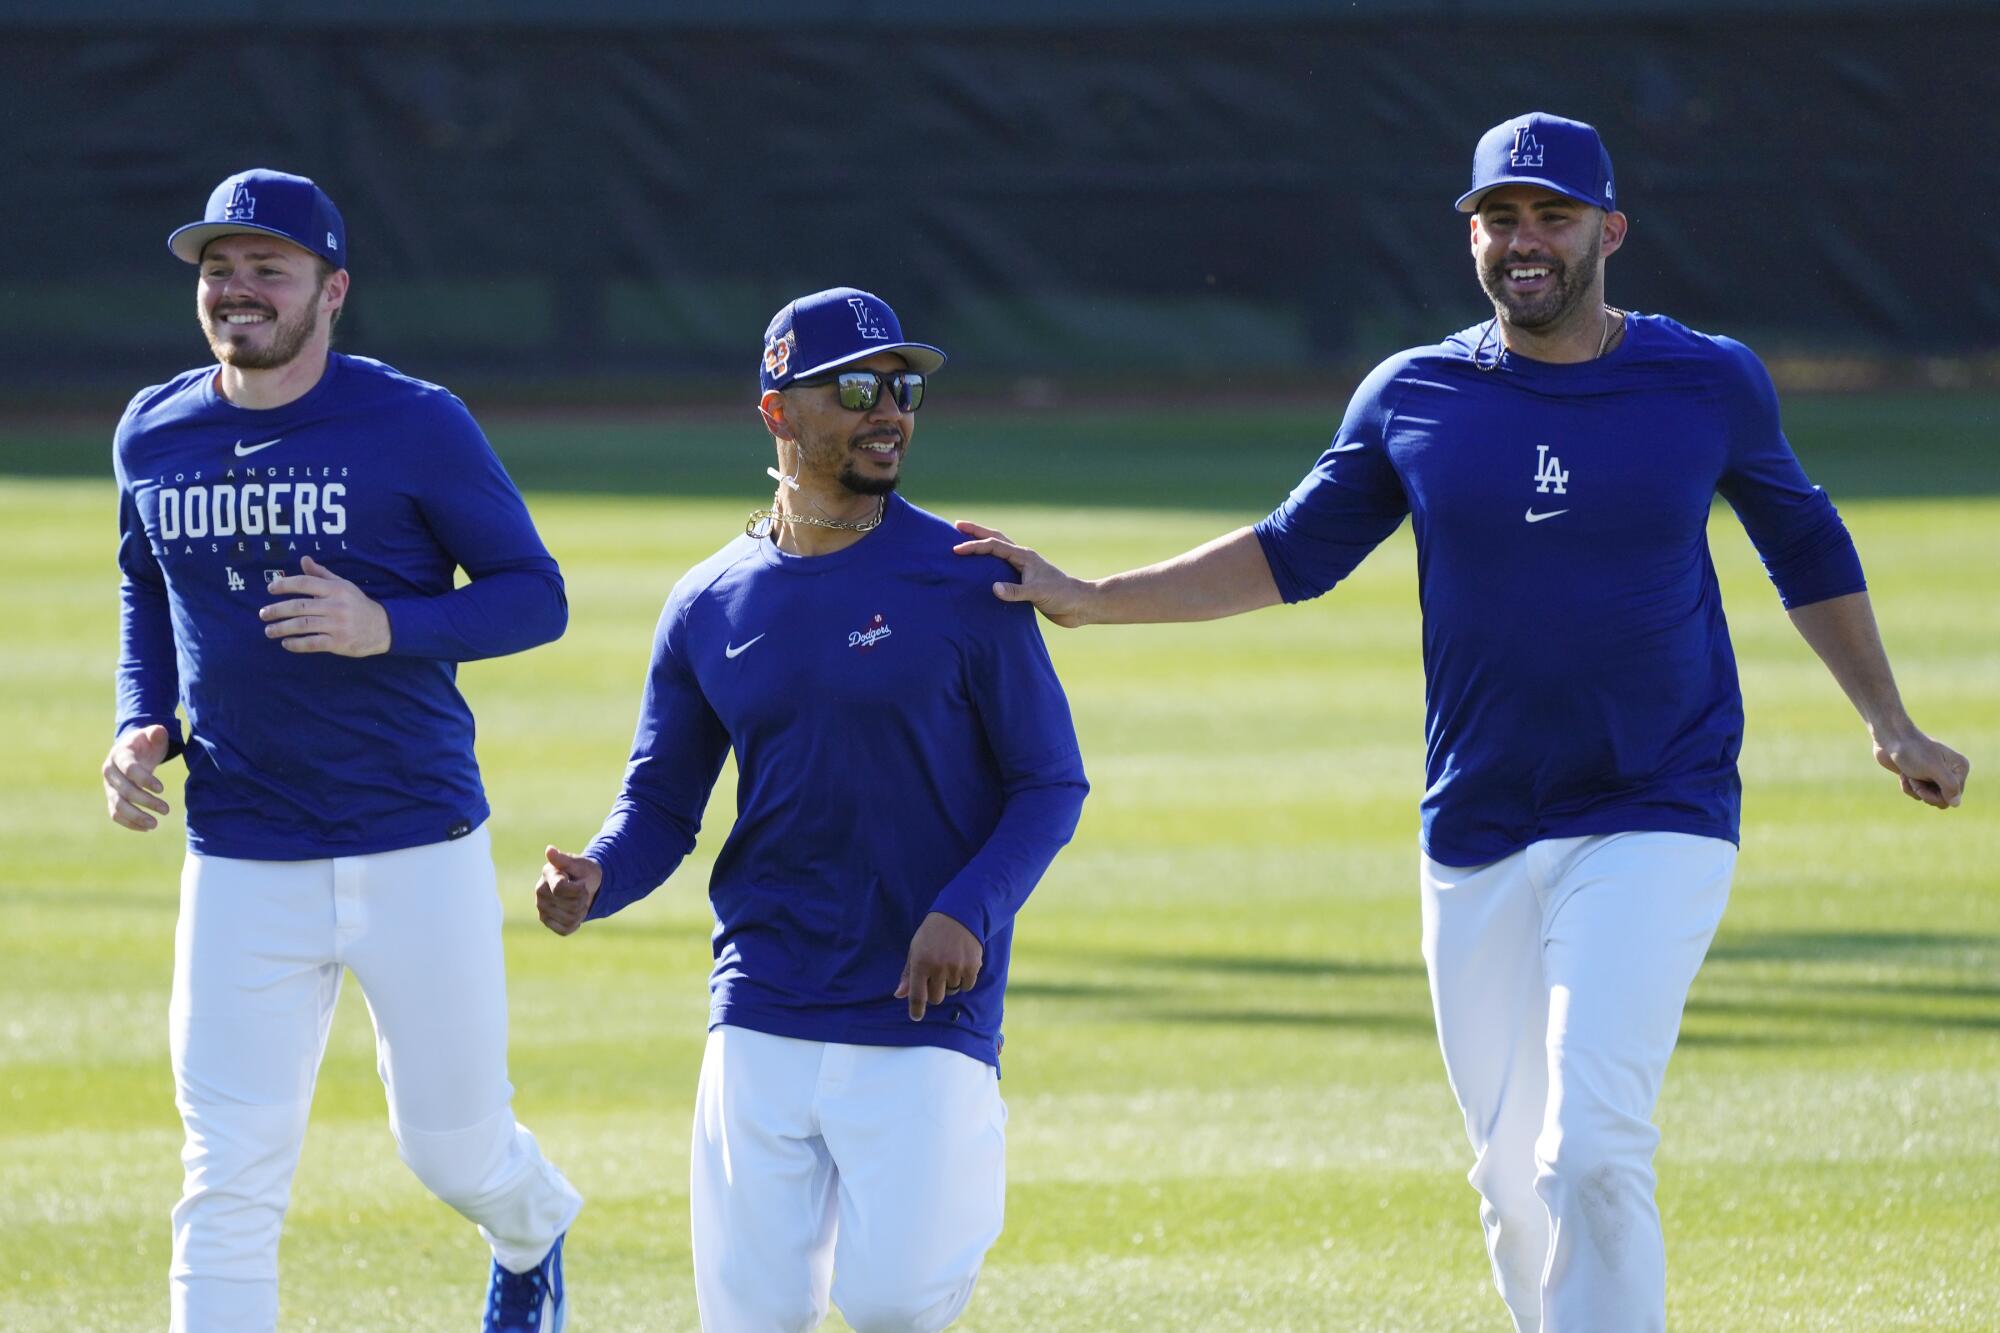 The Dodgers' Gavin Lux, Mookie Betts and J.D. Martinez run during a spring training workout in Phoenix 